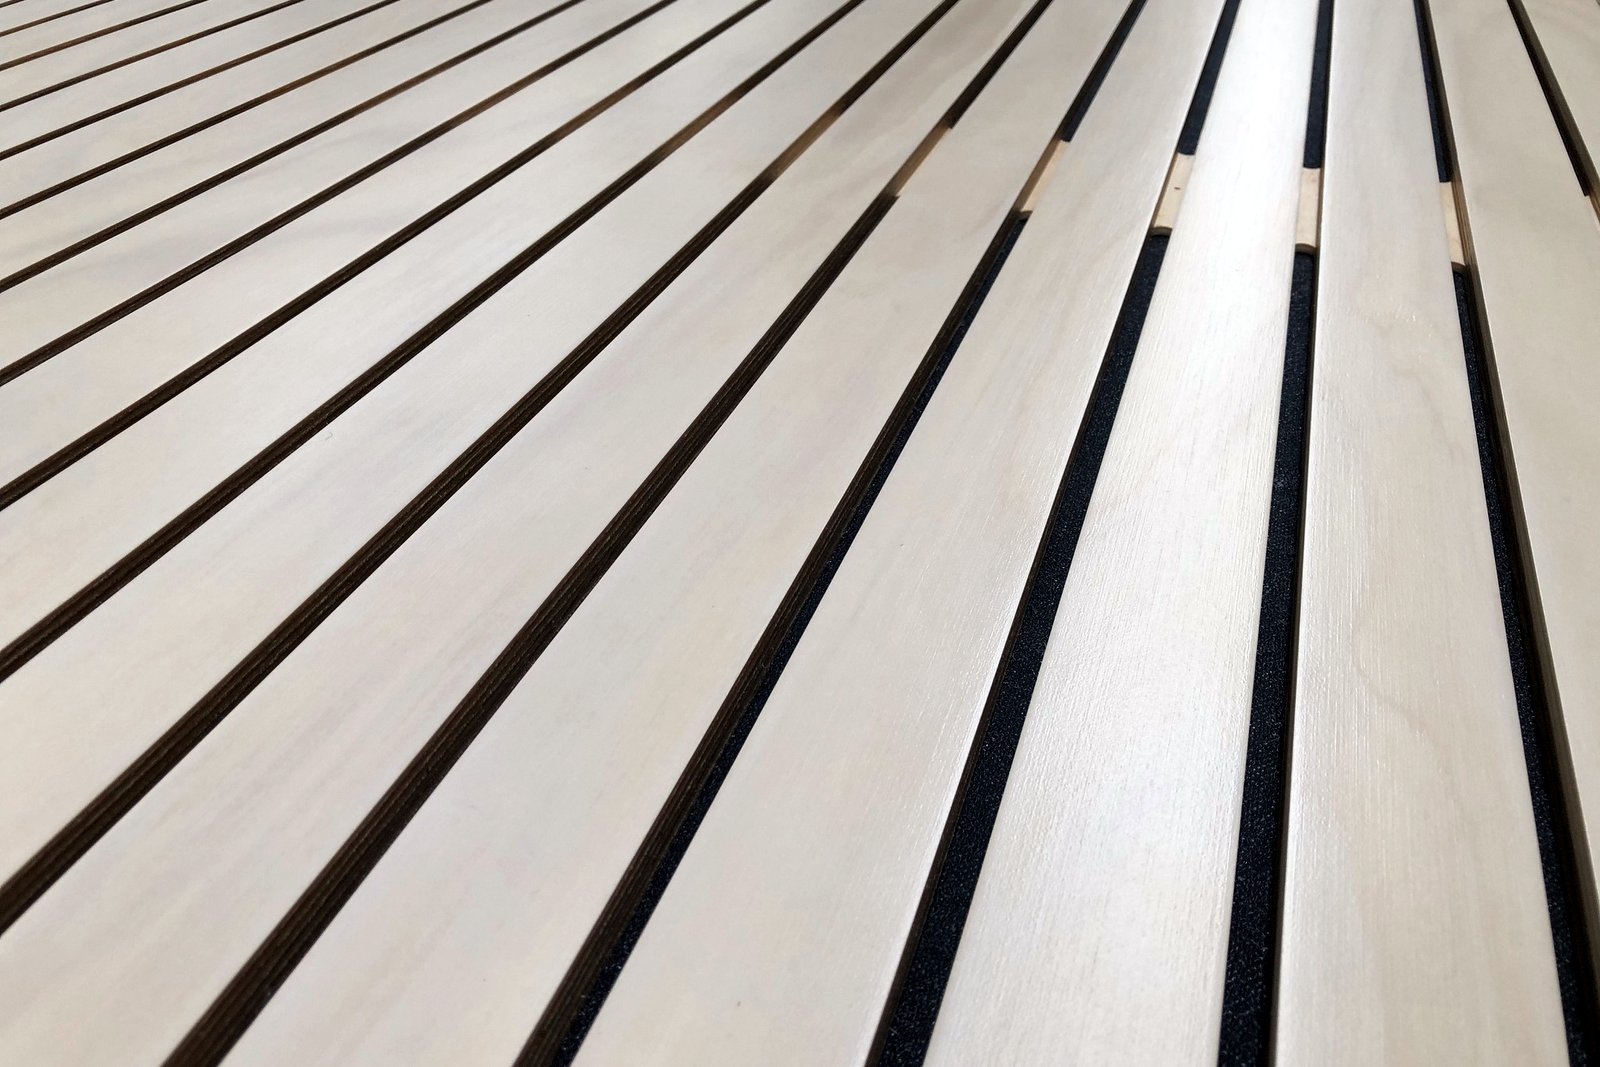 Austral Slatpanel as cost-effective decorative panel with slat styling.